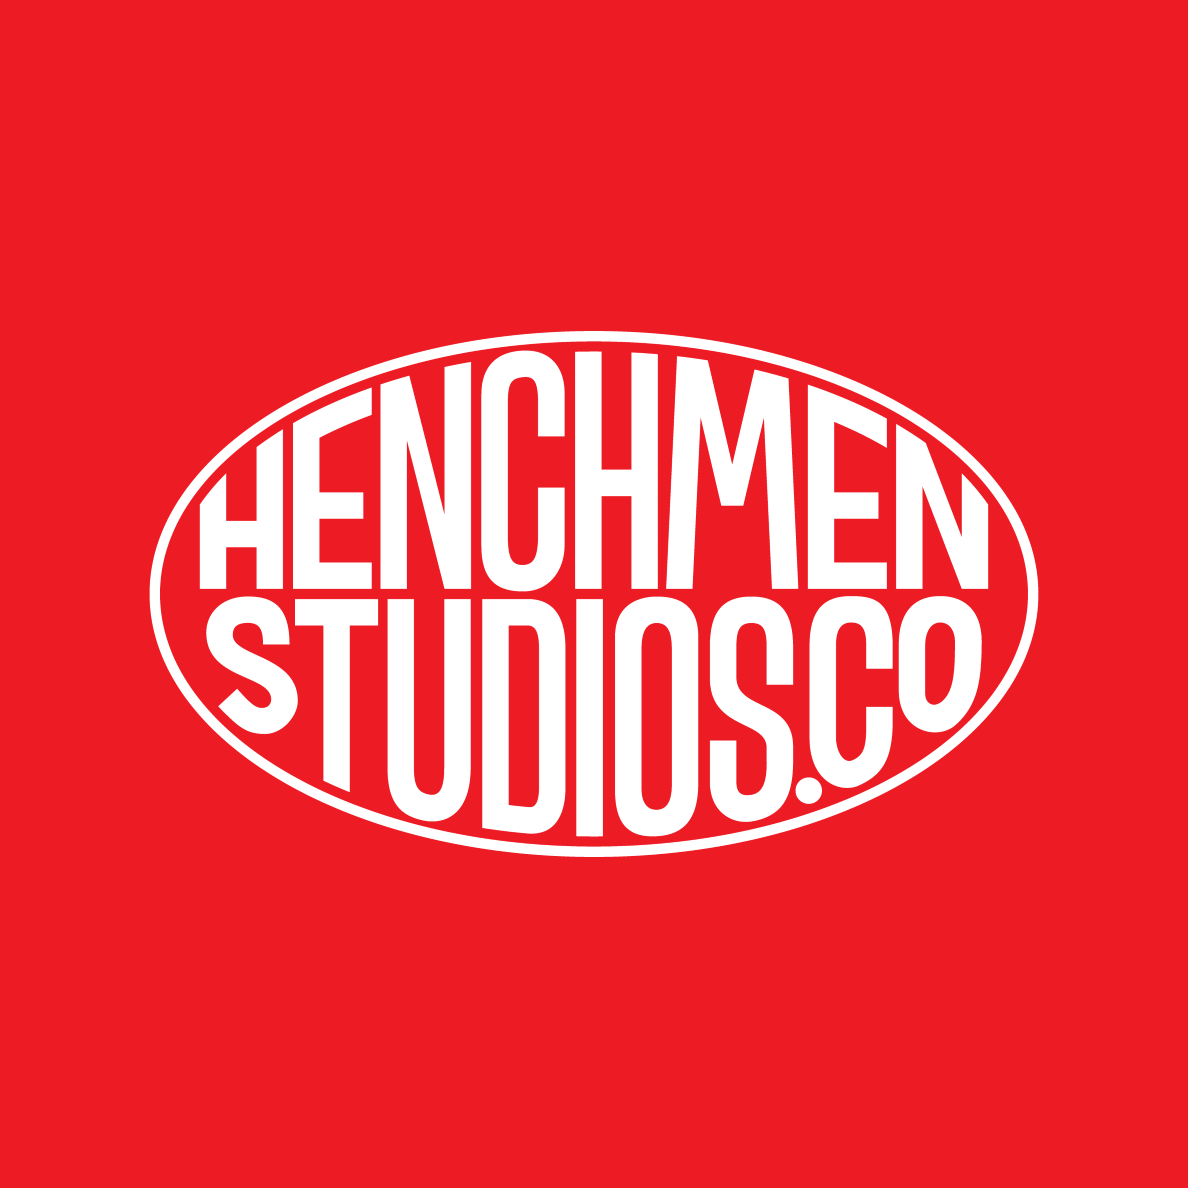 White logo of Henchmen Studios with red background